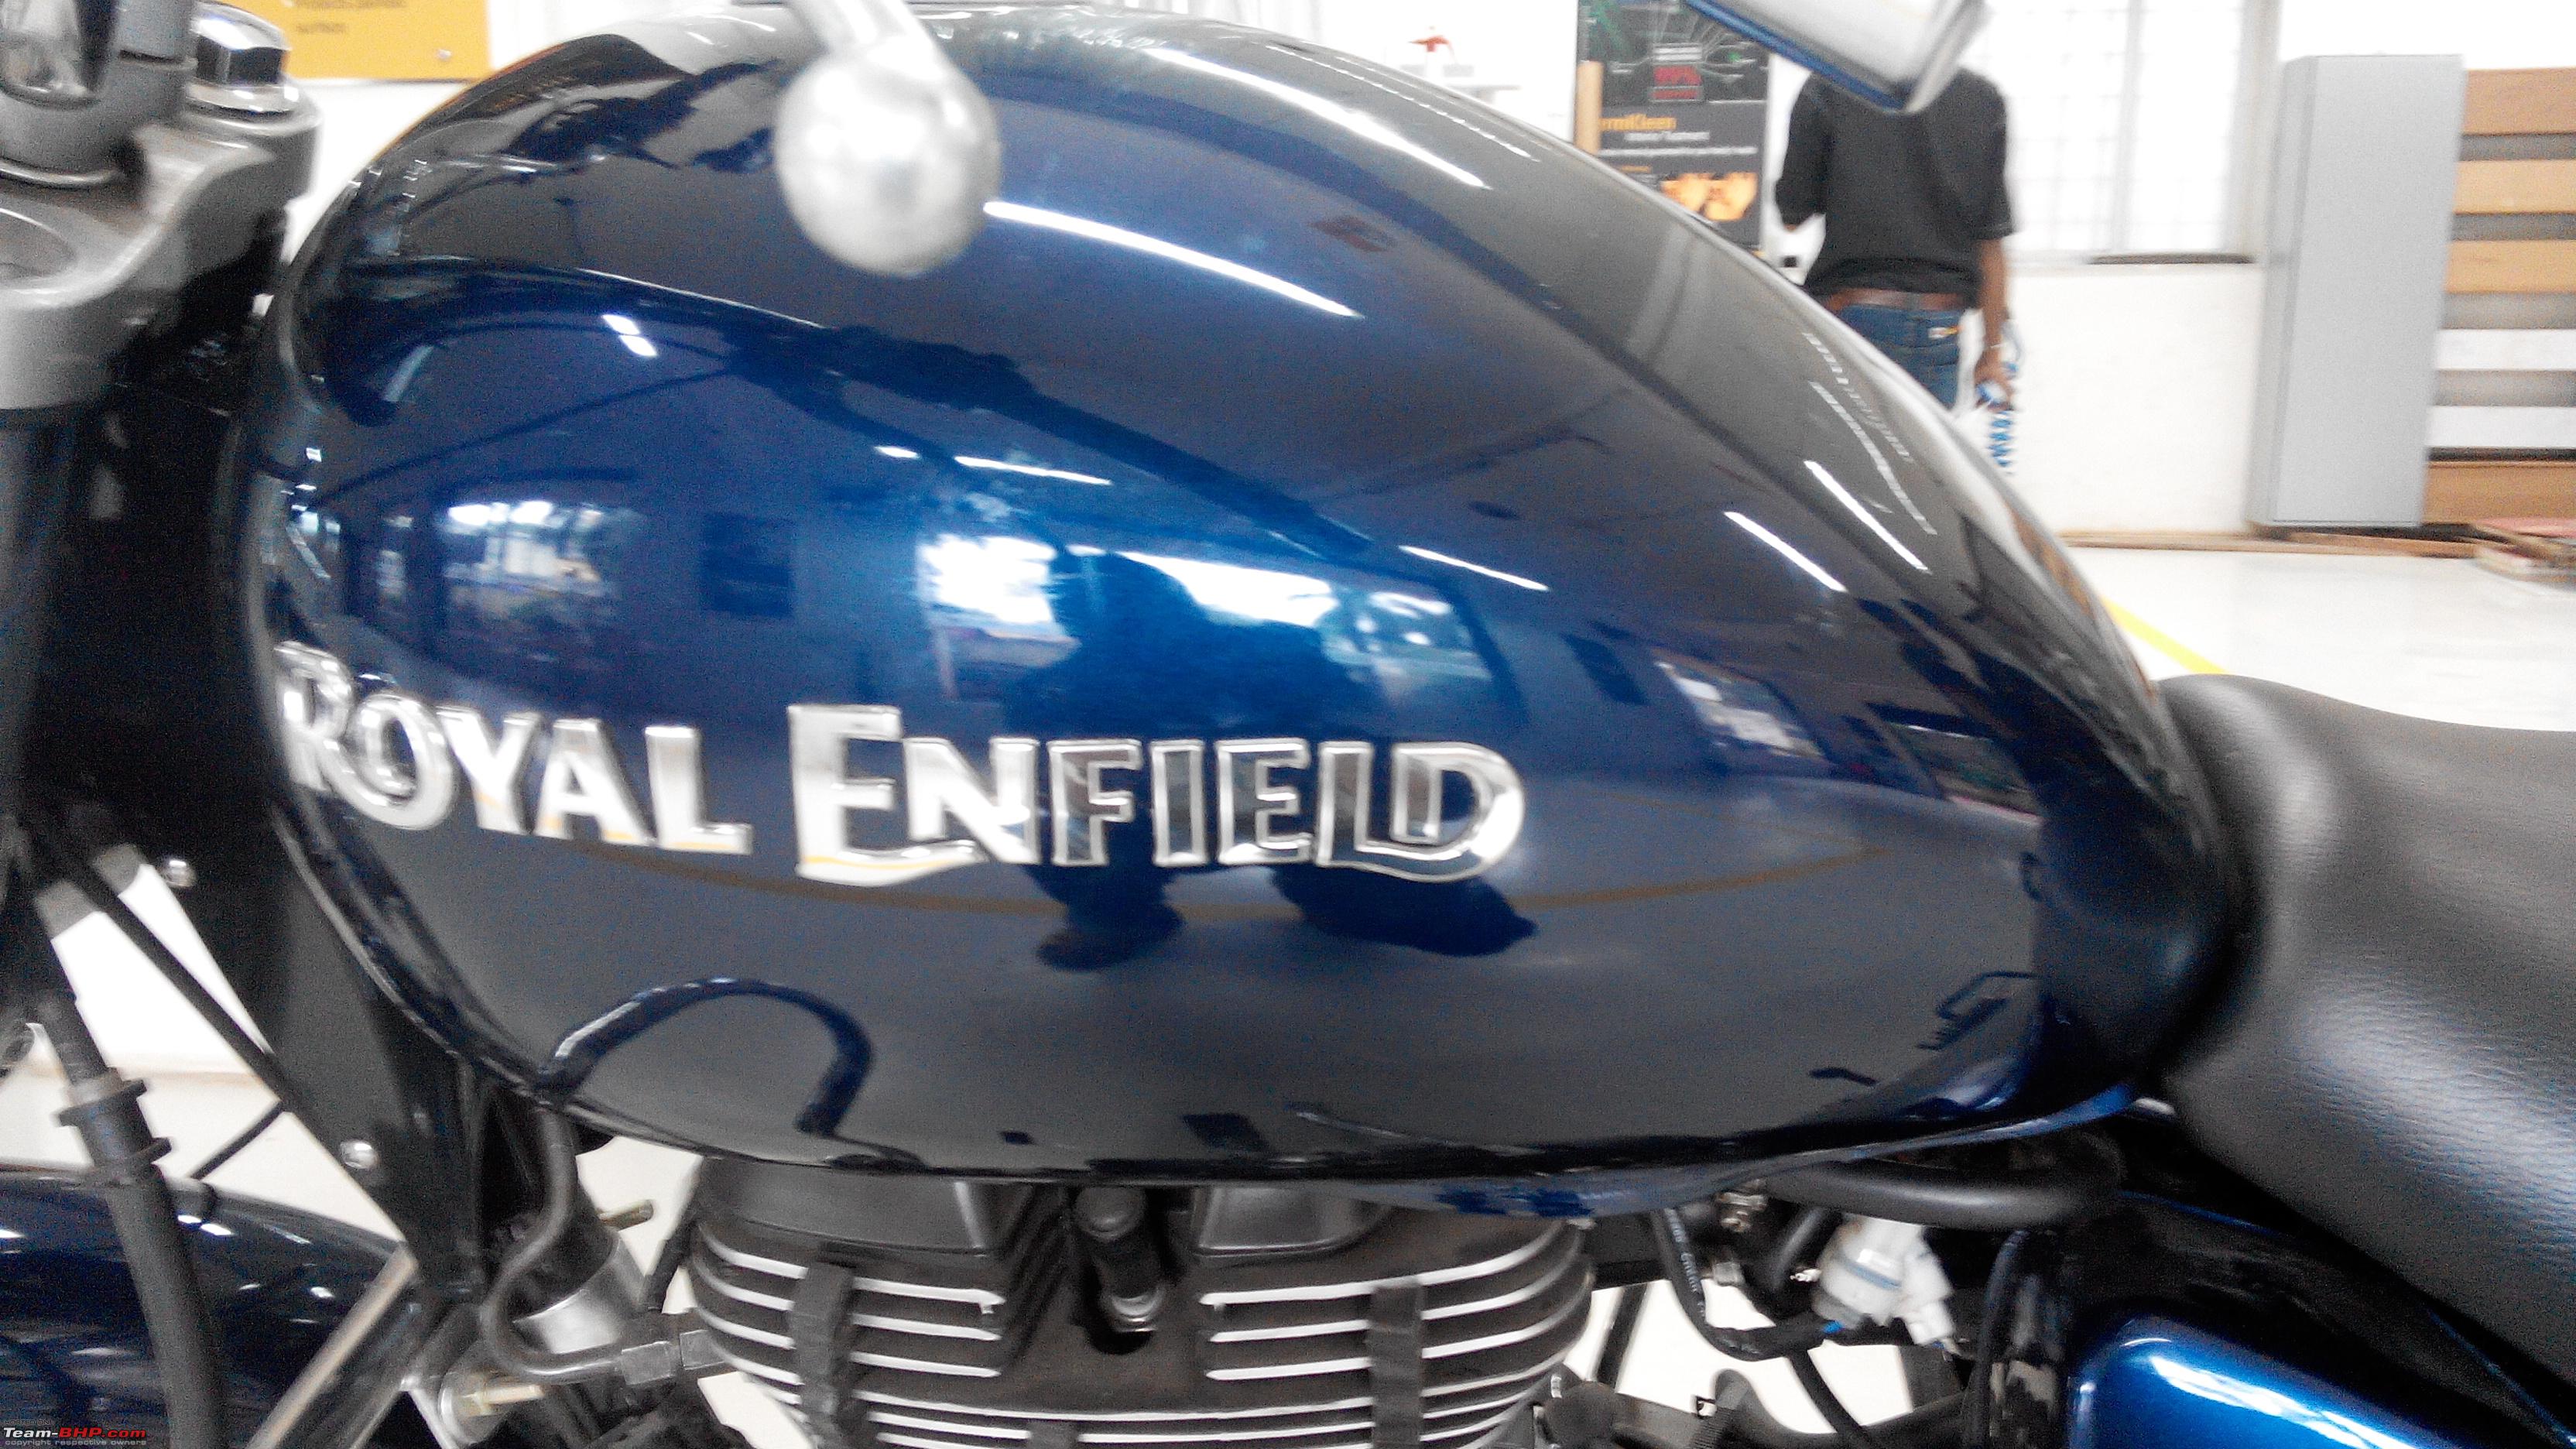 3m tank protector for royal enfield